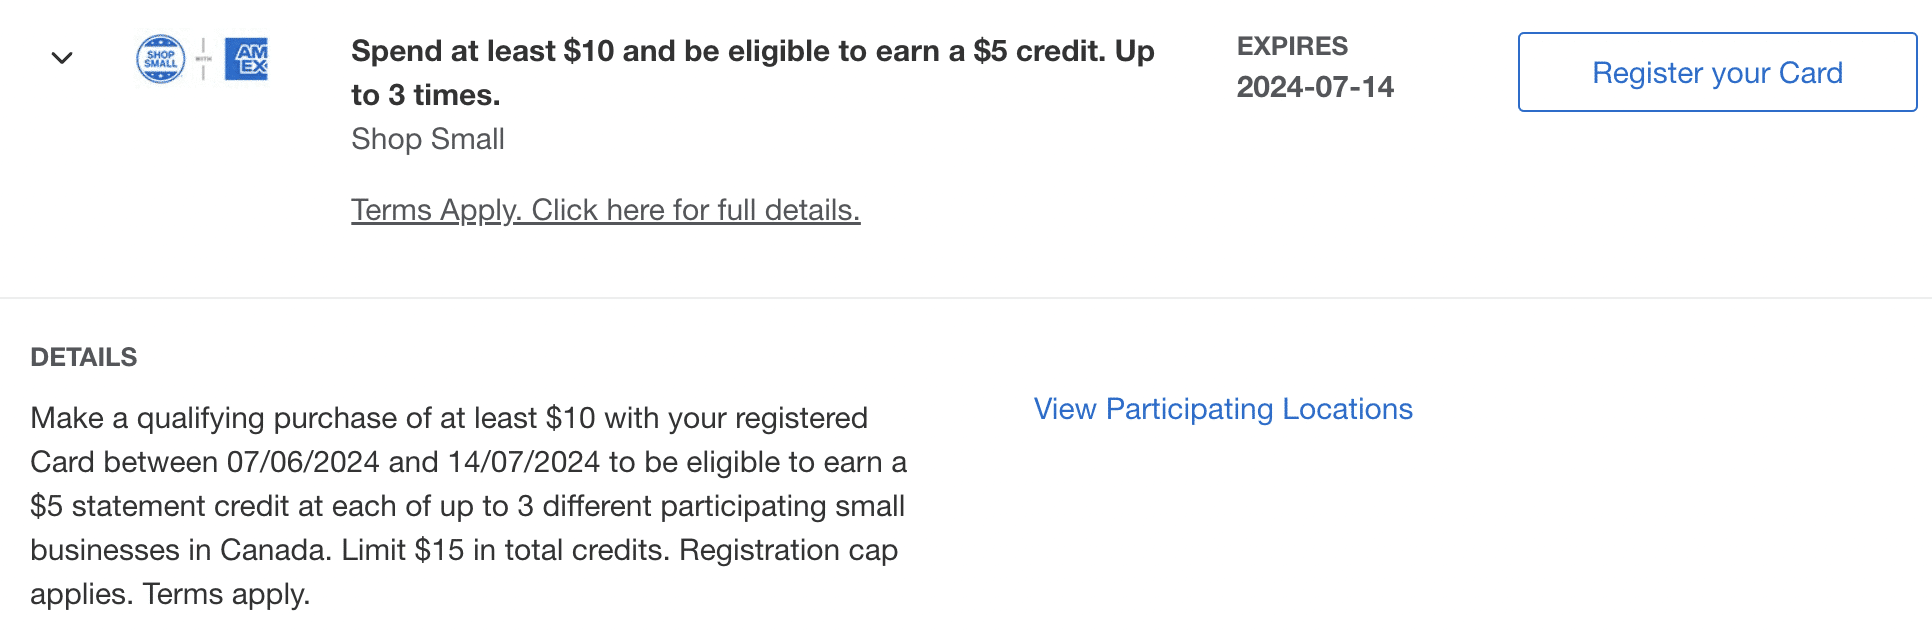 Amex Shop Small Promotion: Spend $10, Get $5